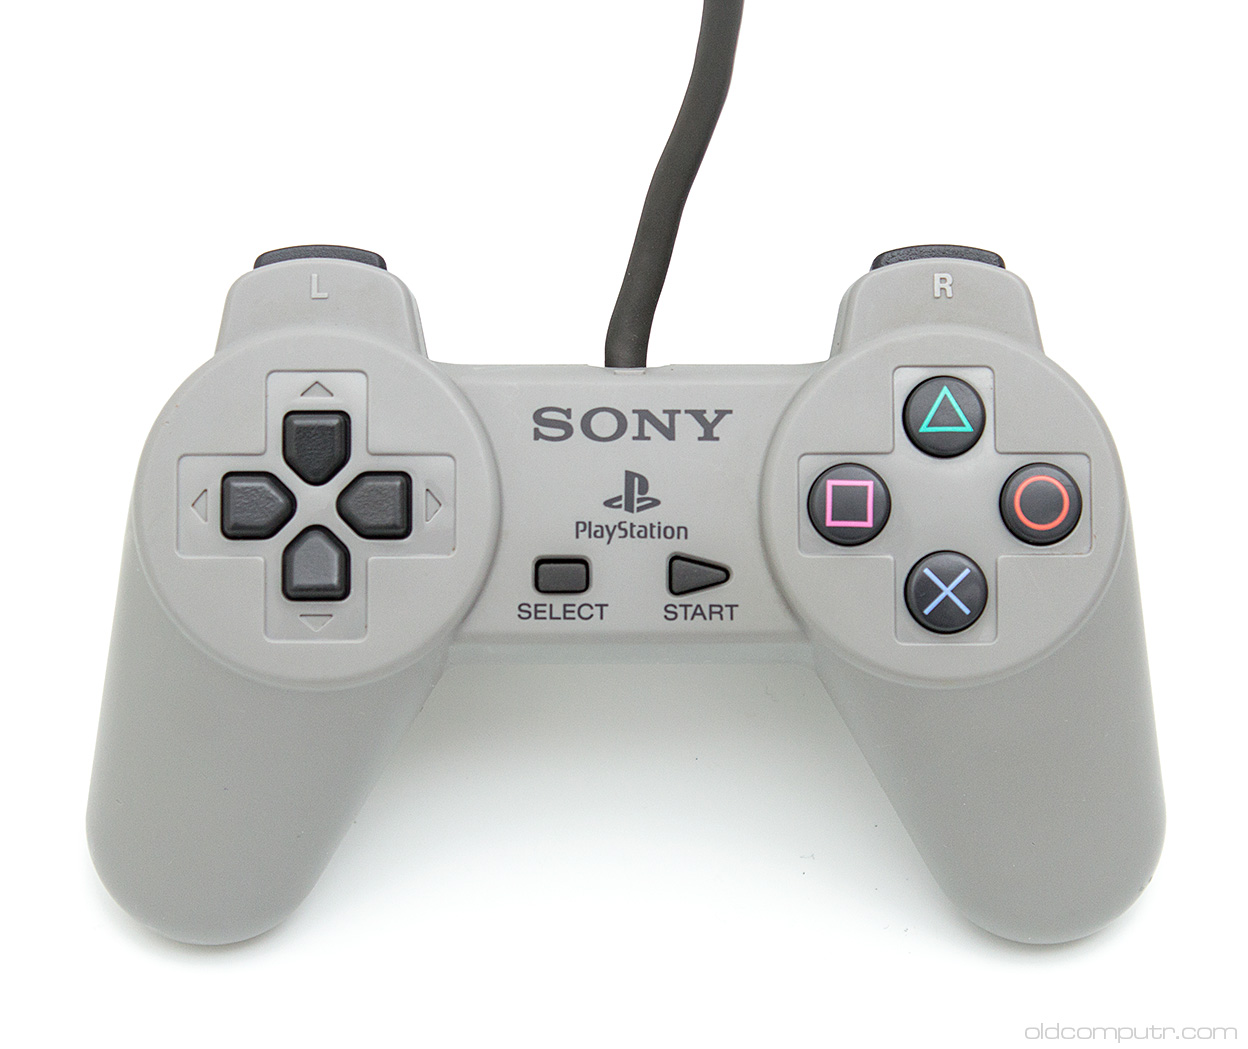 l3 on playstation controller